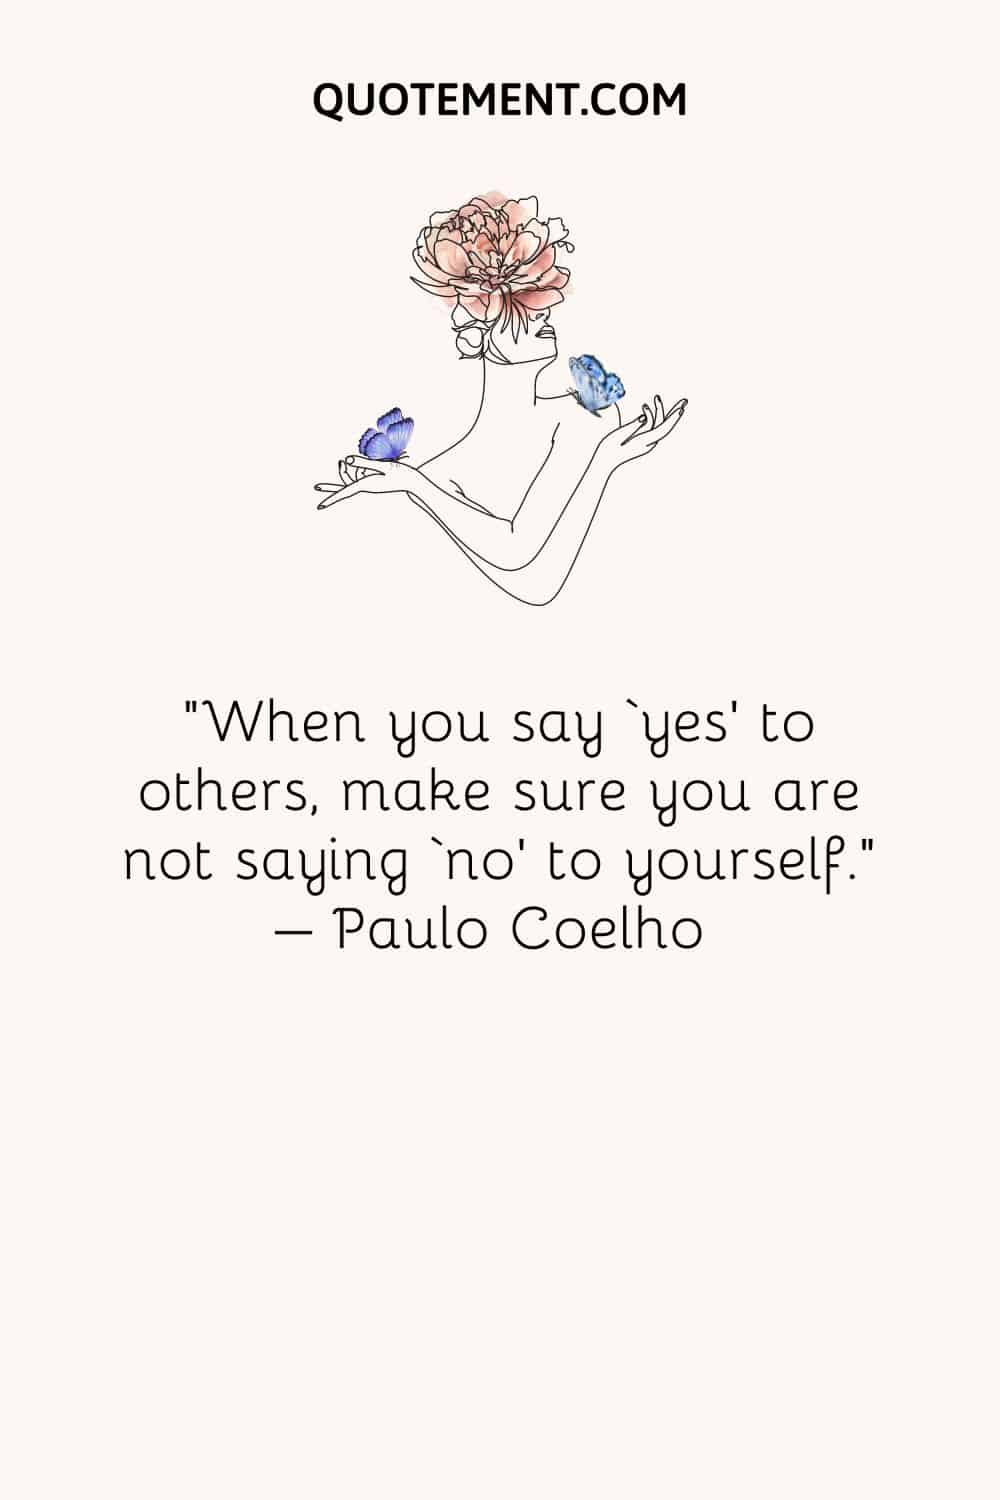 When you say ‘yes’ to others, make sure you are not saying ‘no’ to yourself